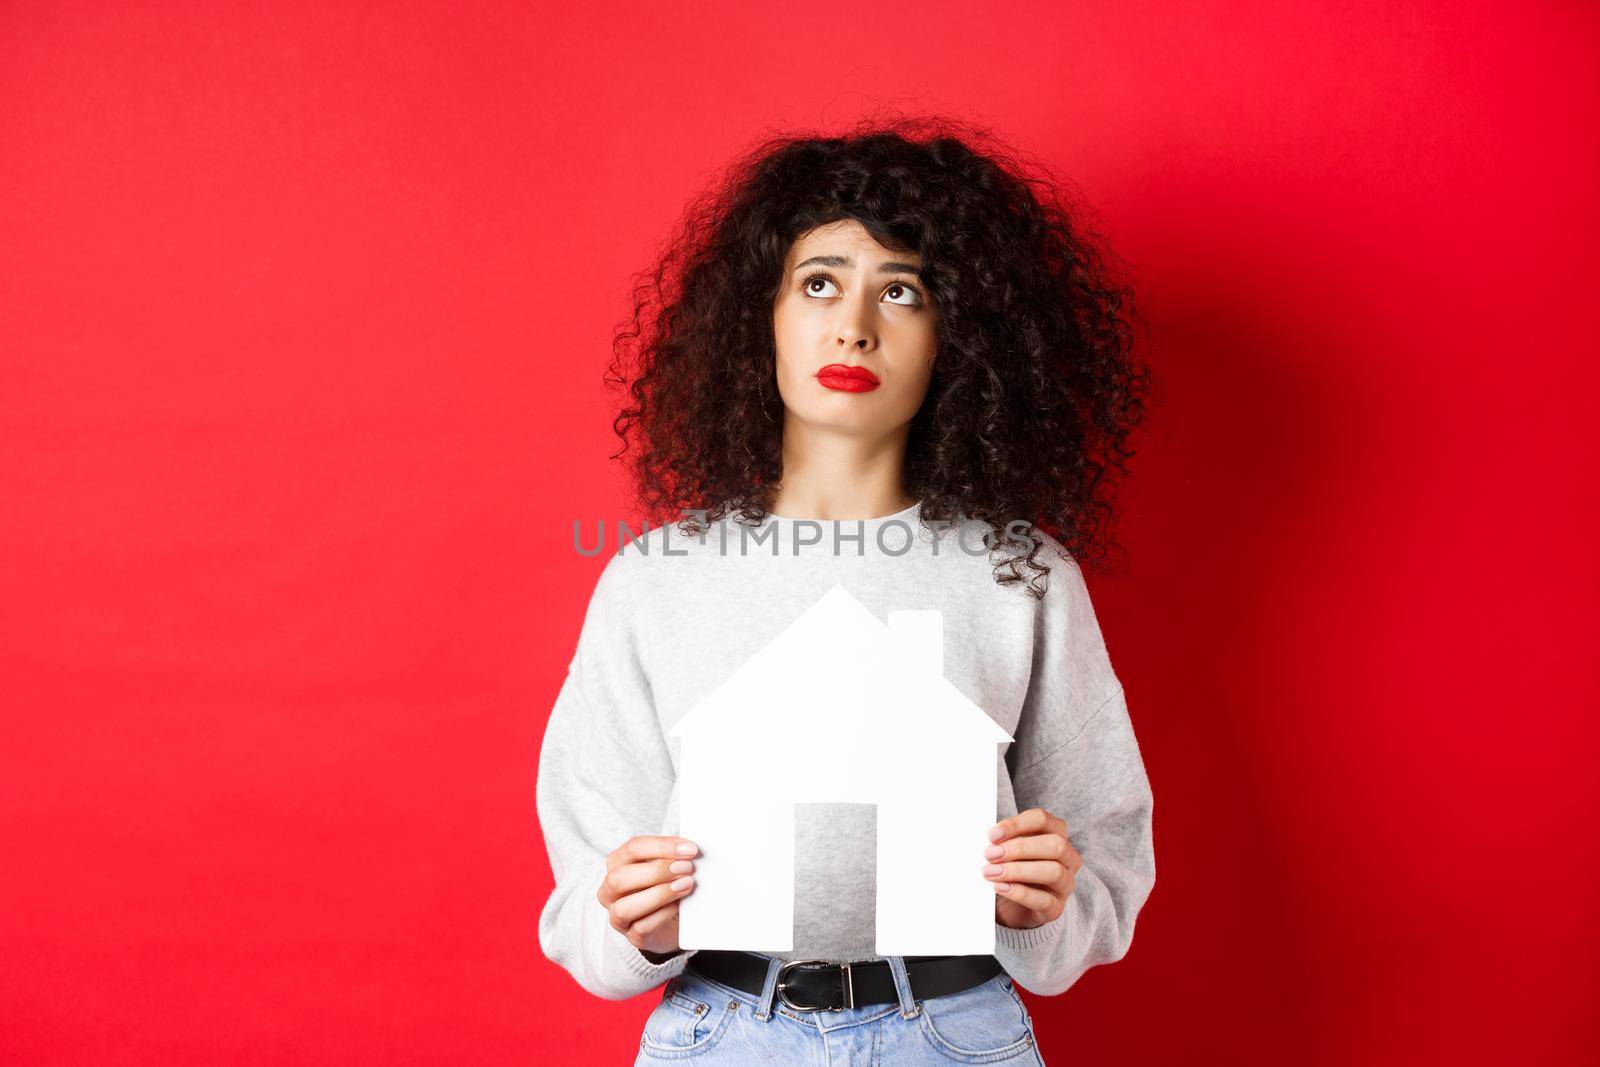 Real estate. Sad woman dreaming of buying apartment, holding paper house cutout and looking up distressed, standing on red background.